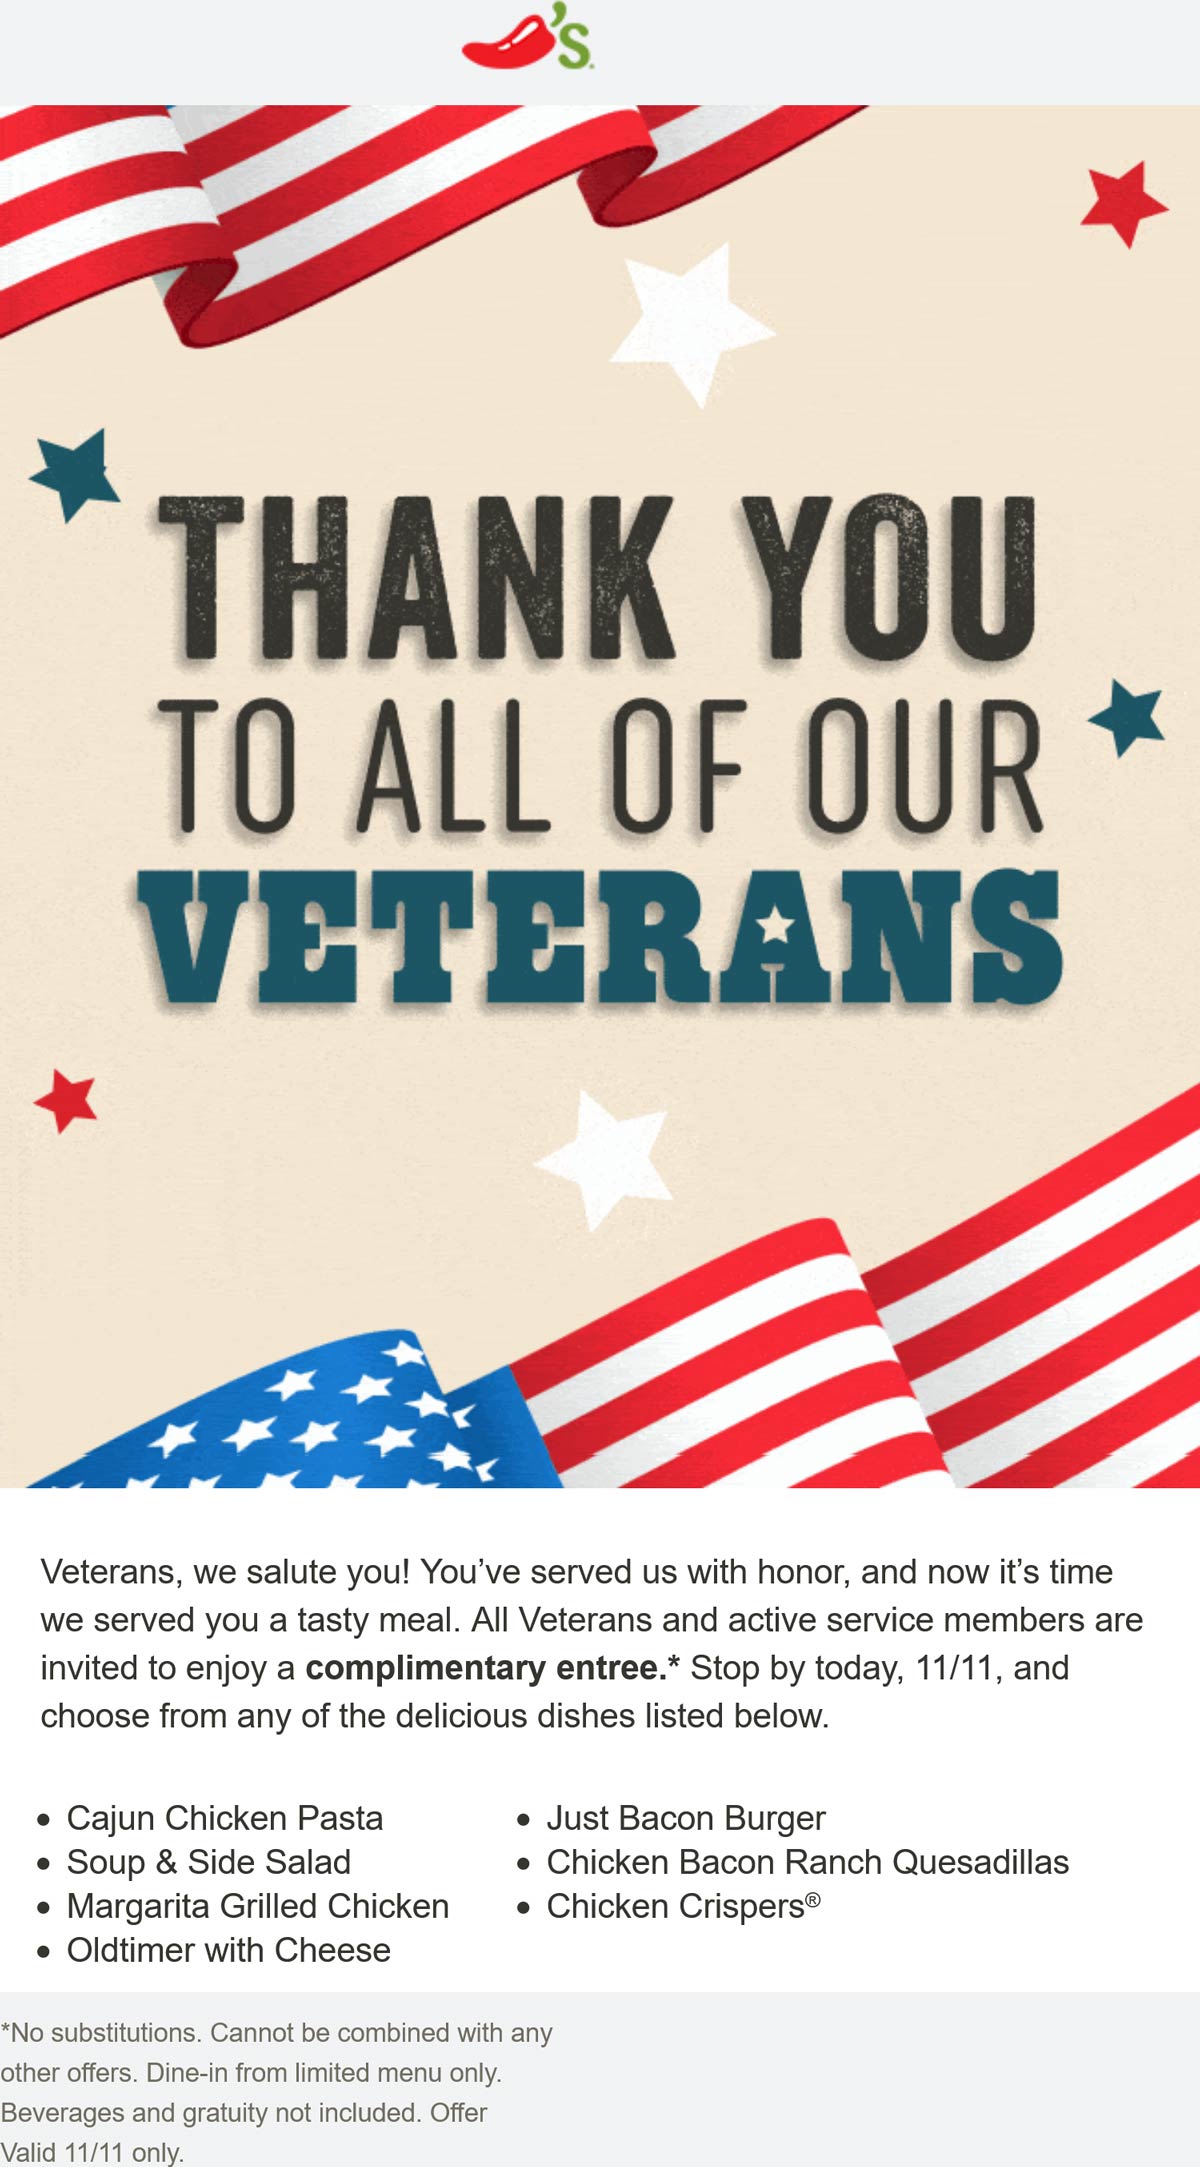 Chilis restaurants Coupon  Complimentary entree for veterans today at Chilis #chilis 